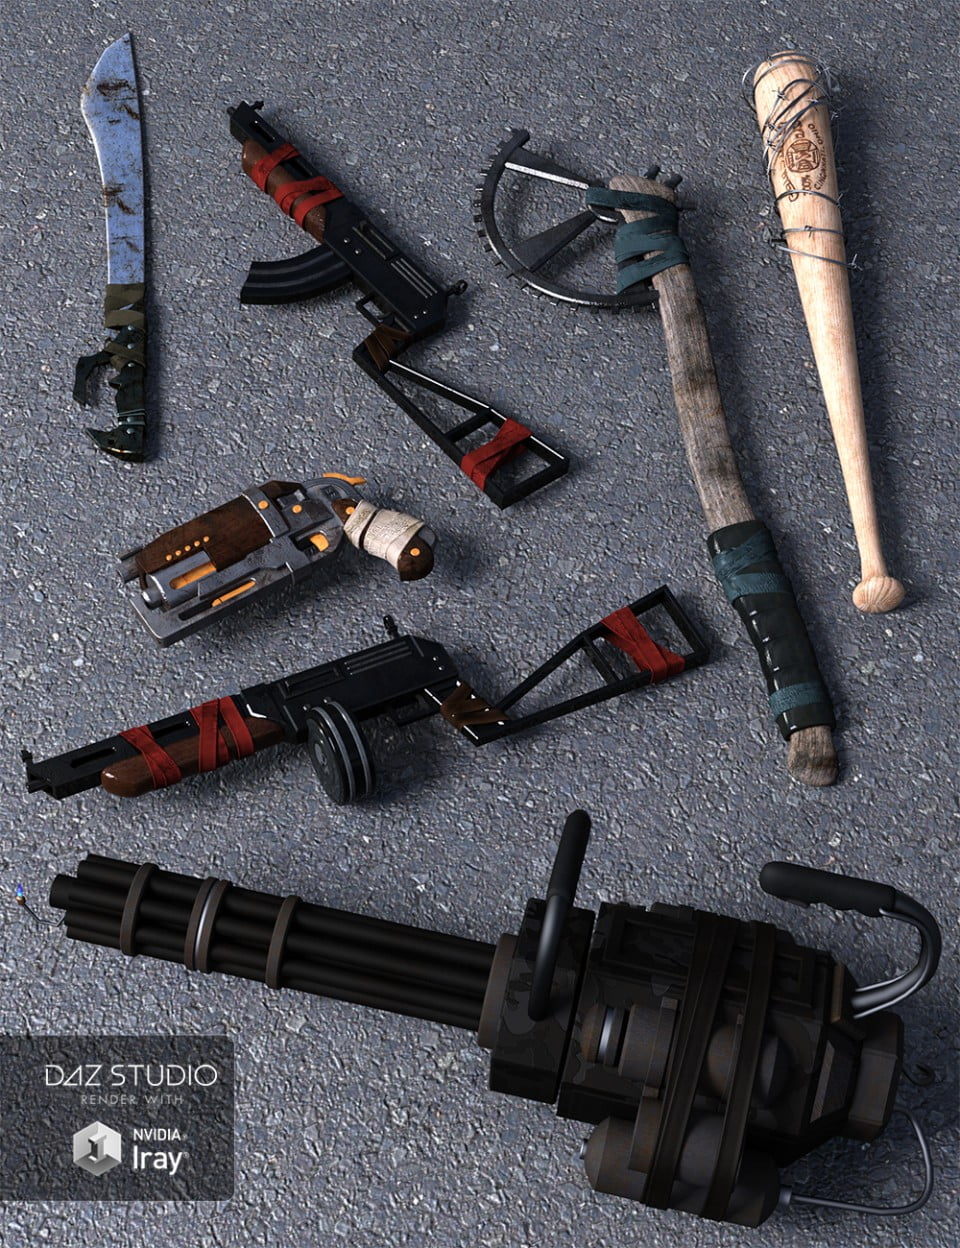 00-daz3d_mad-weapons